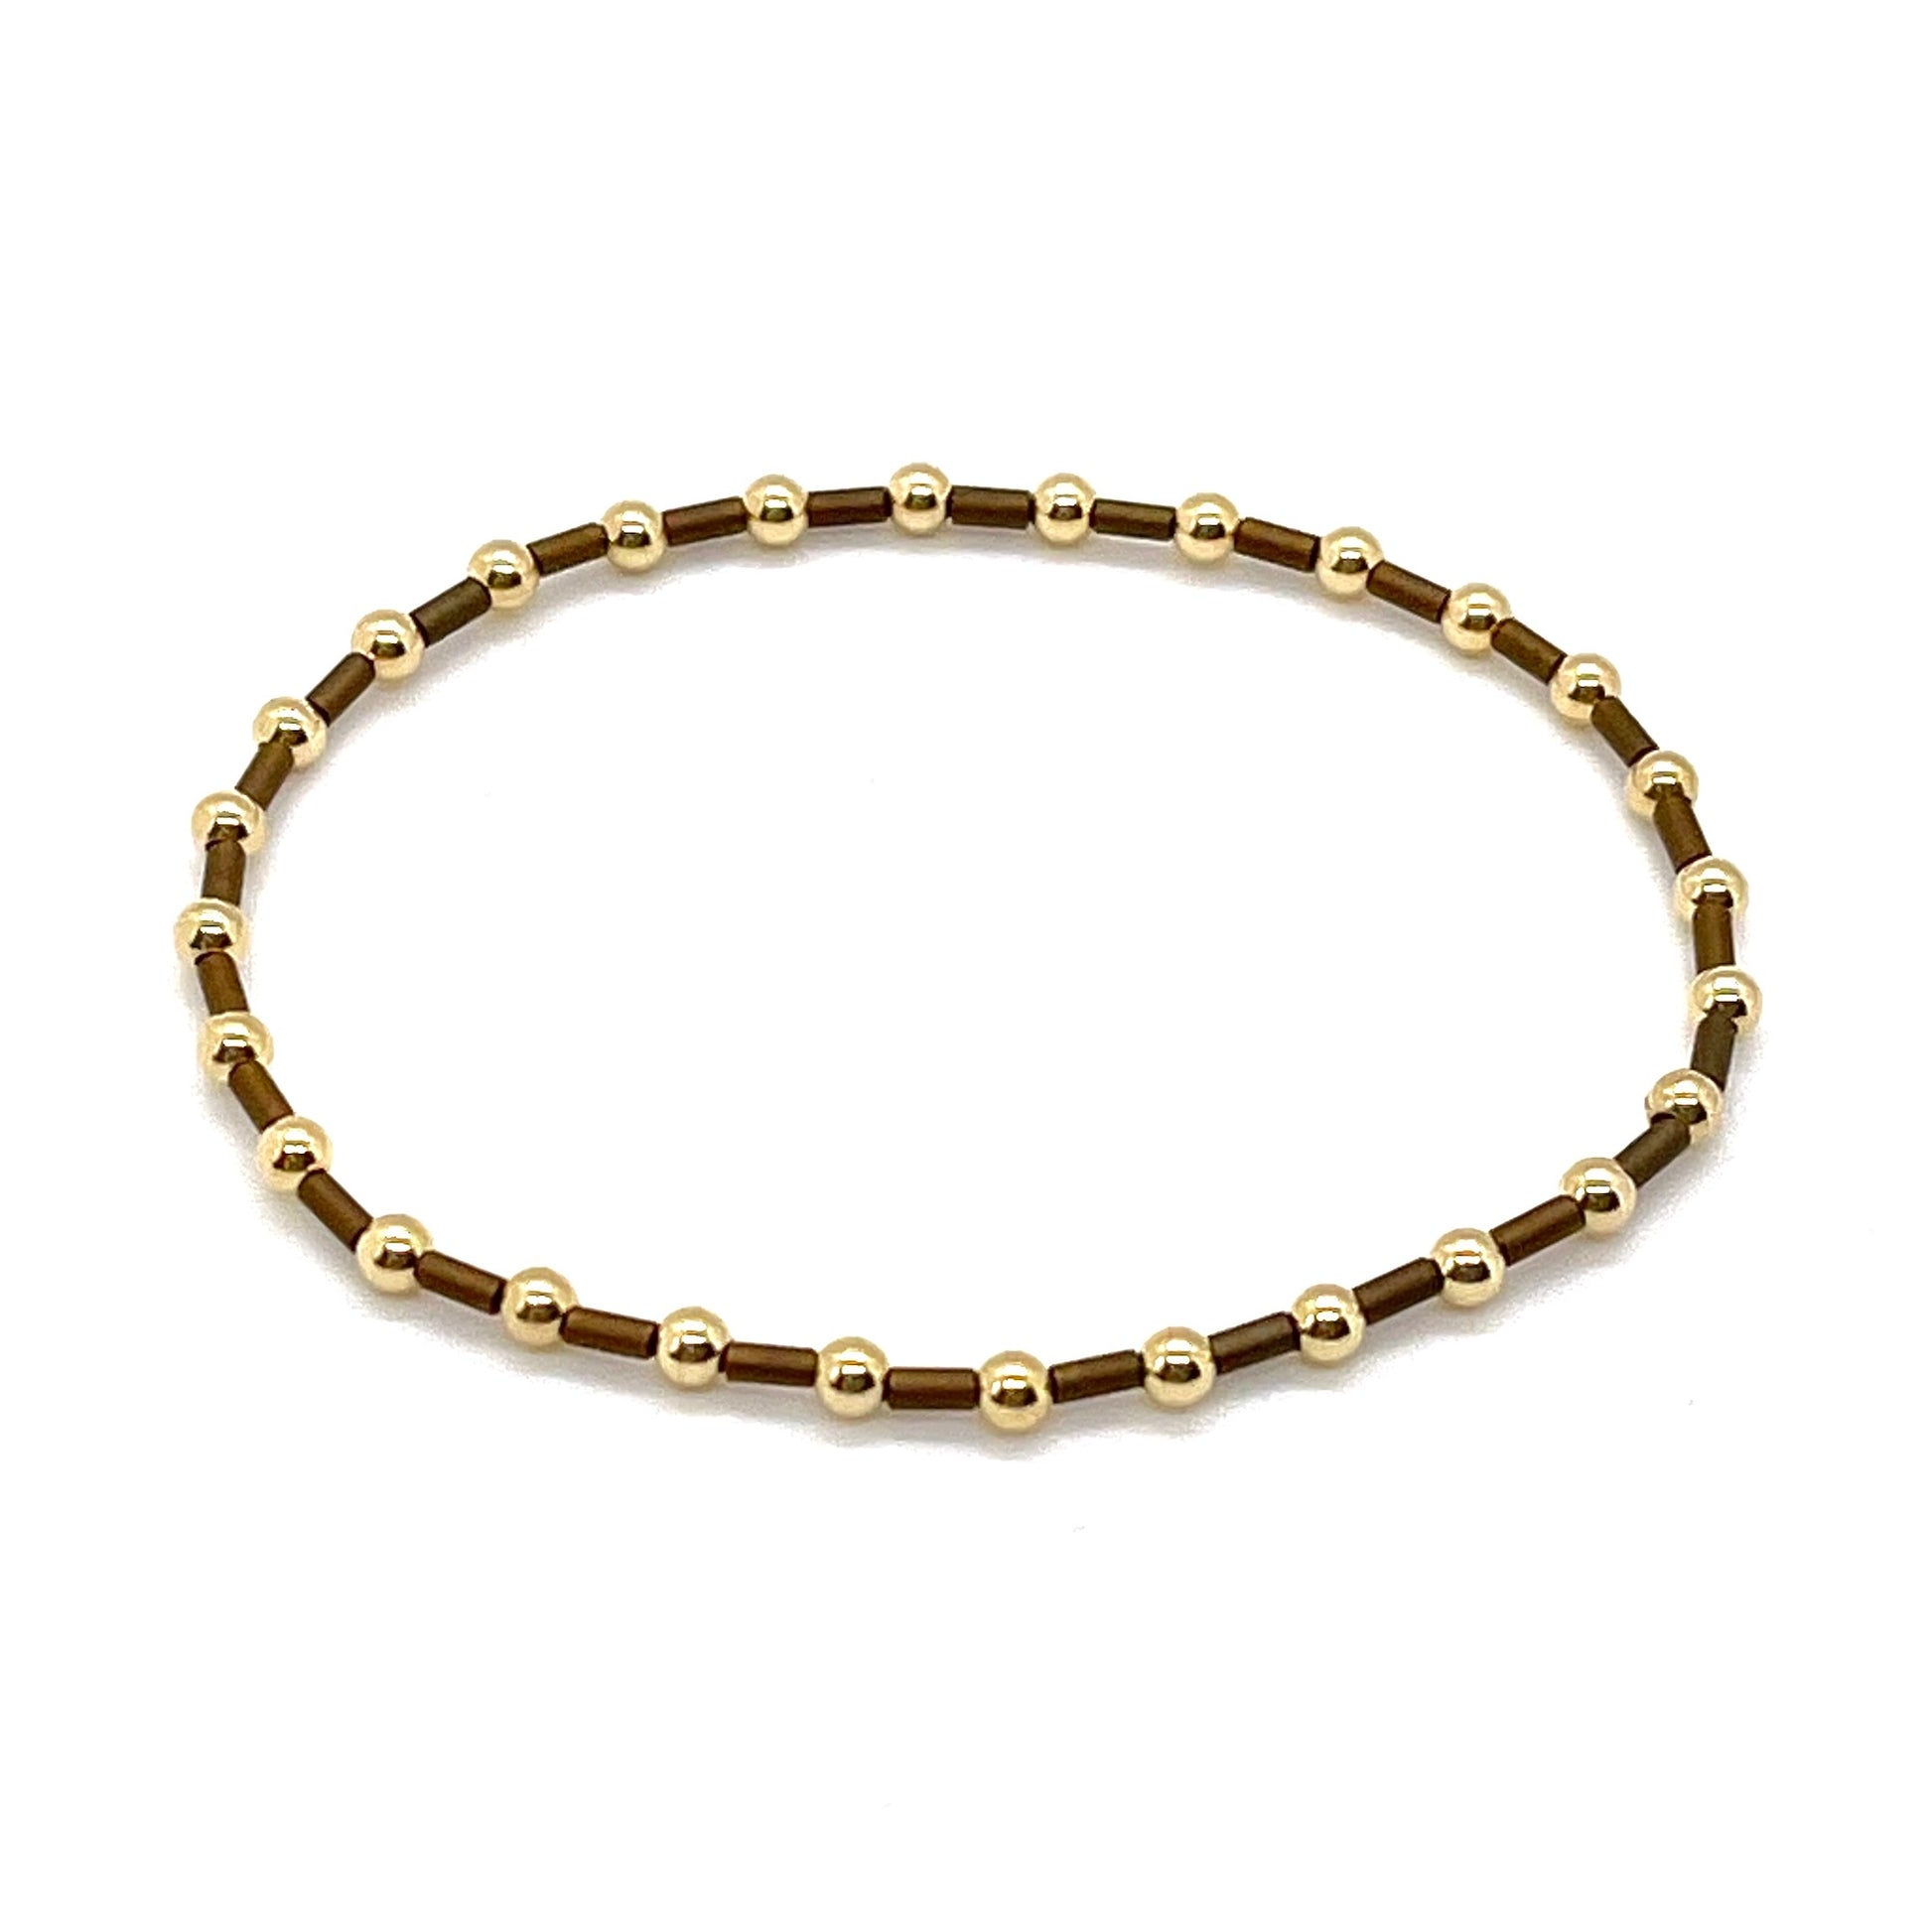 Brown and 3mm gold bead women's stretch bracelet.